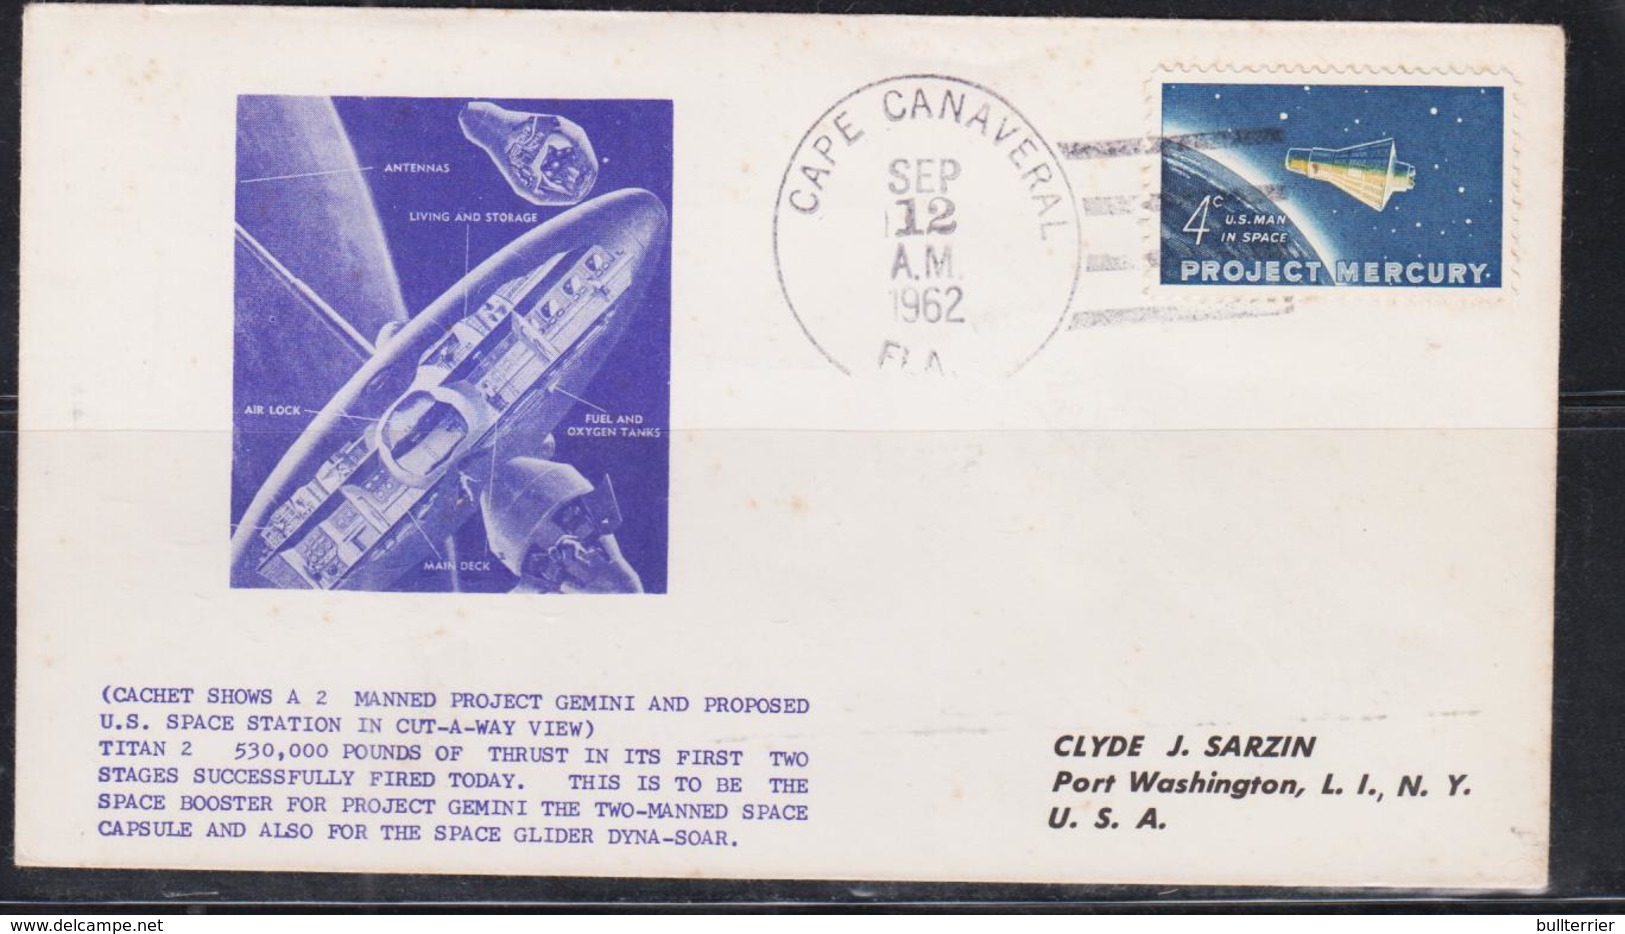 SPACE  - USA-  1962 - A2 GEMINI  ILLUSTRATED   COVER WITH  LARGE CAPE CANAVERAL  SEP 12 1962  POSTMARK - Etats-Unis